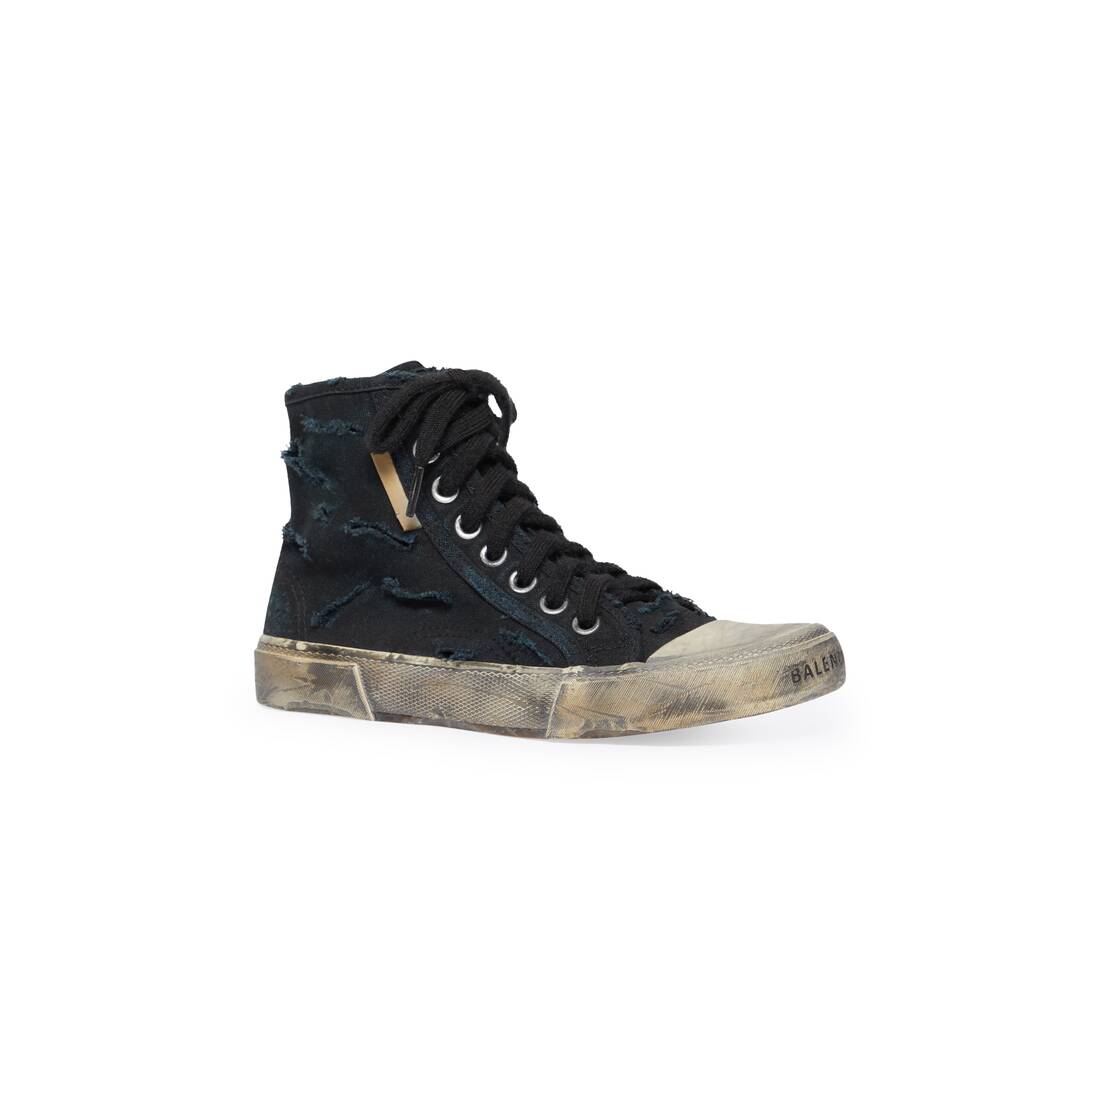 limited edition - paris high top sneaker full destroyed